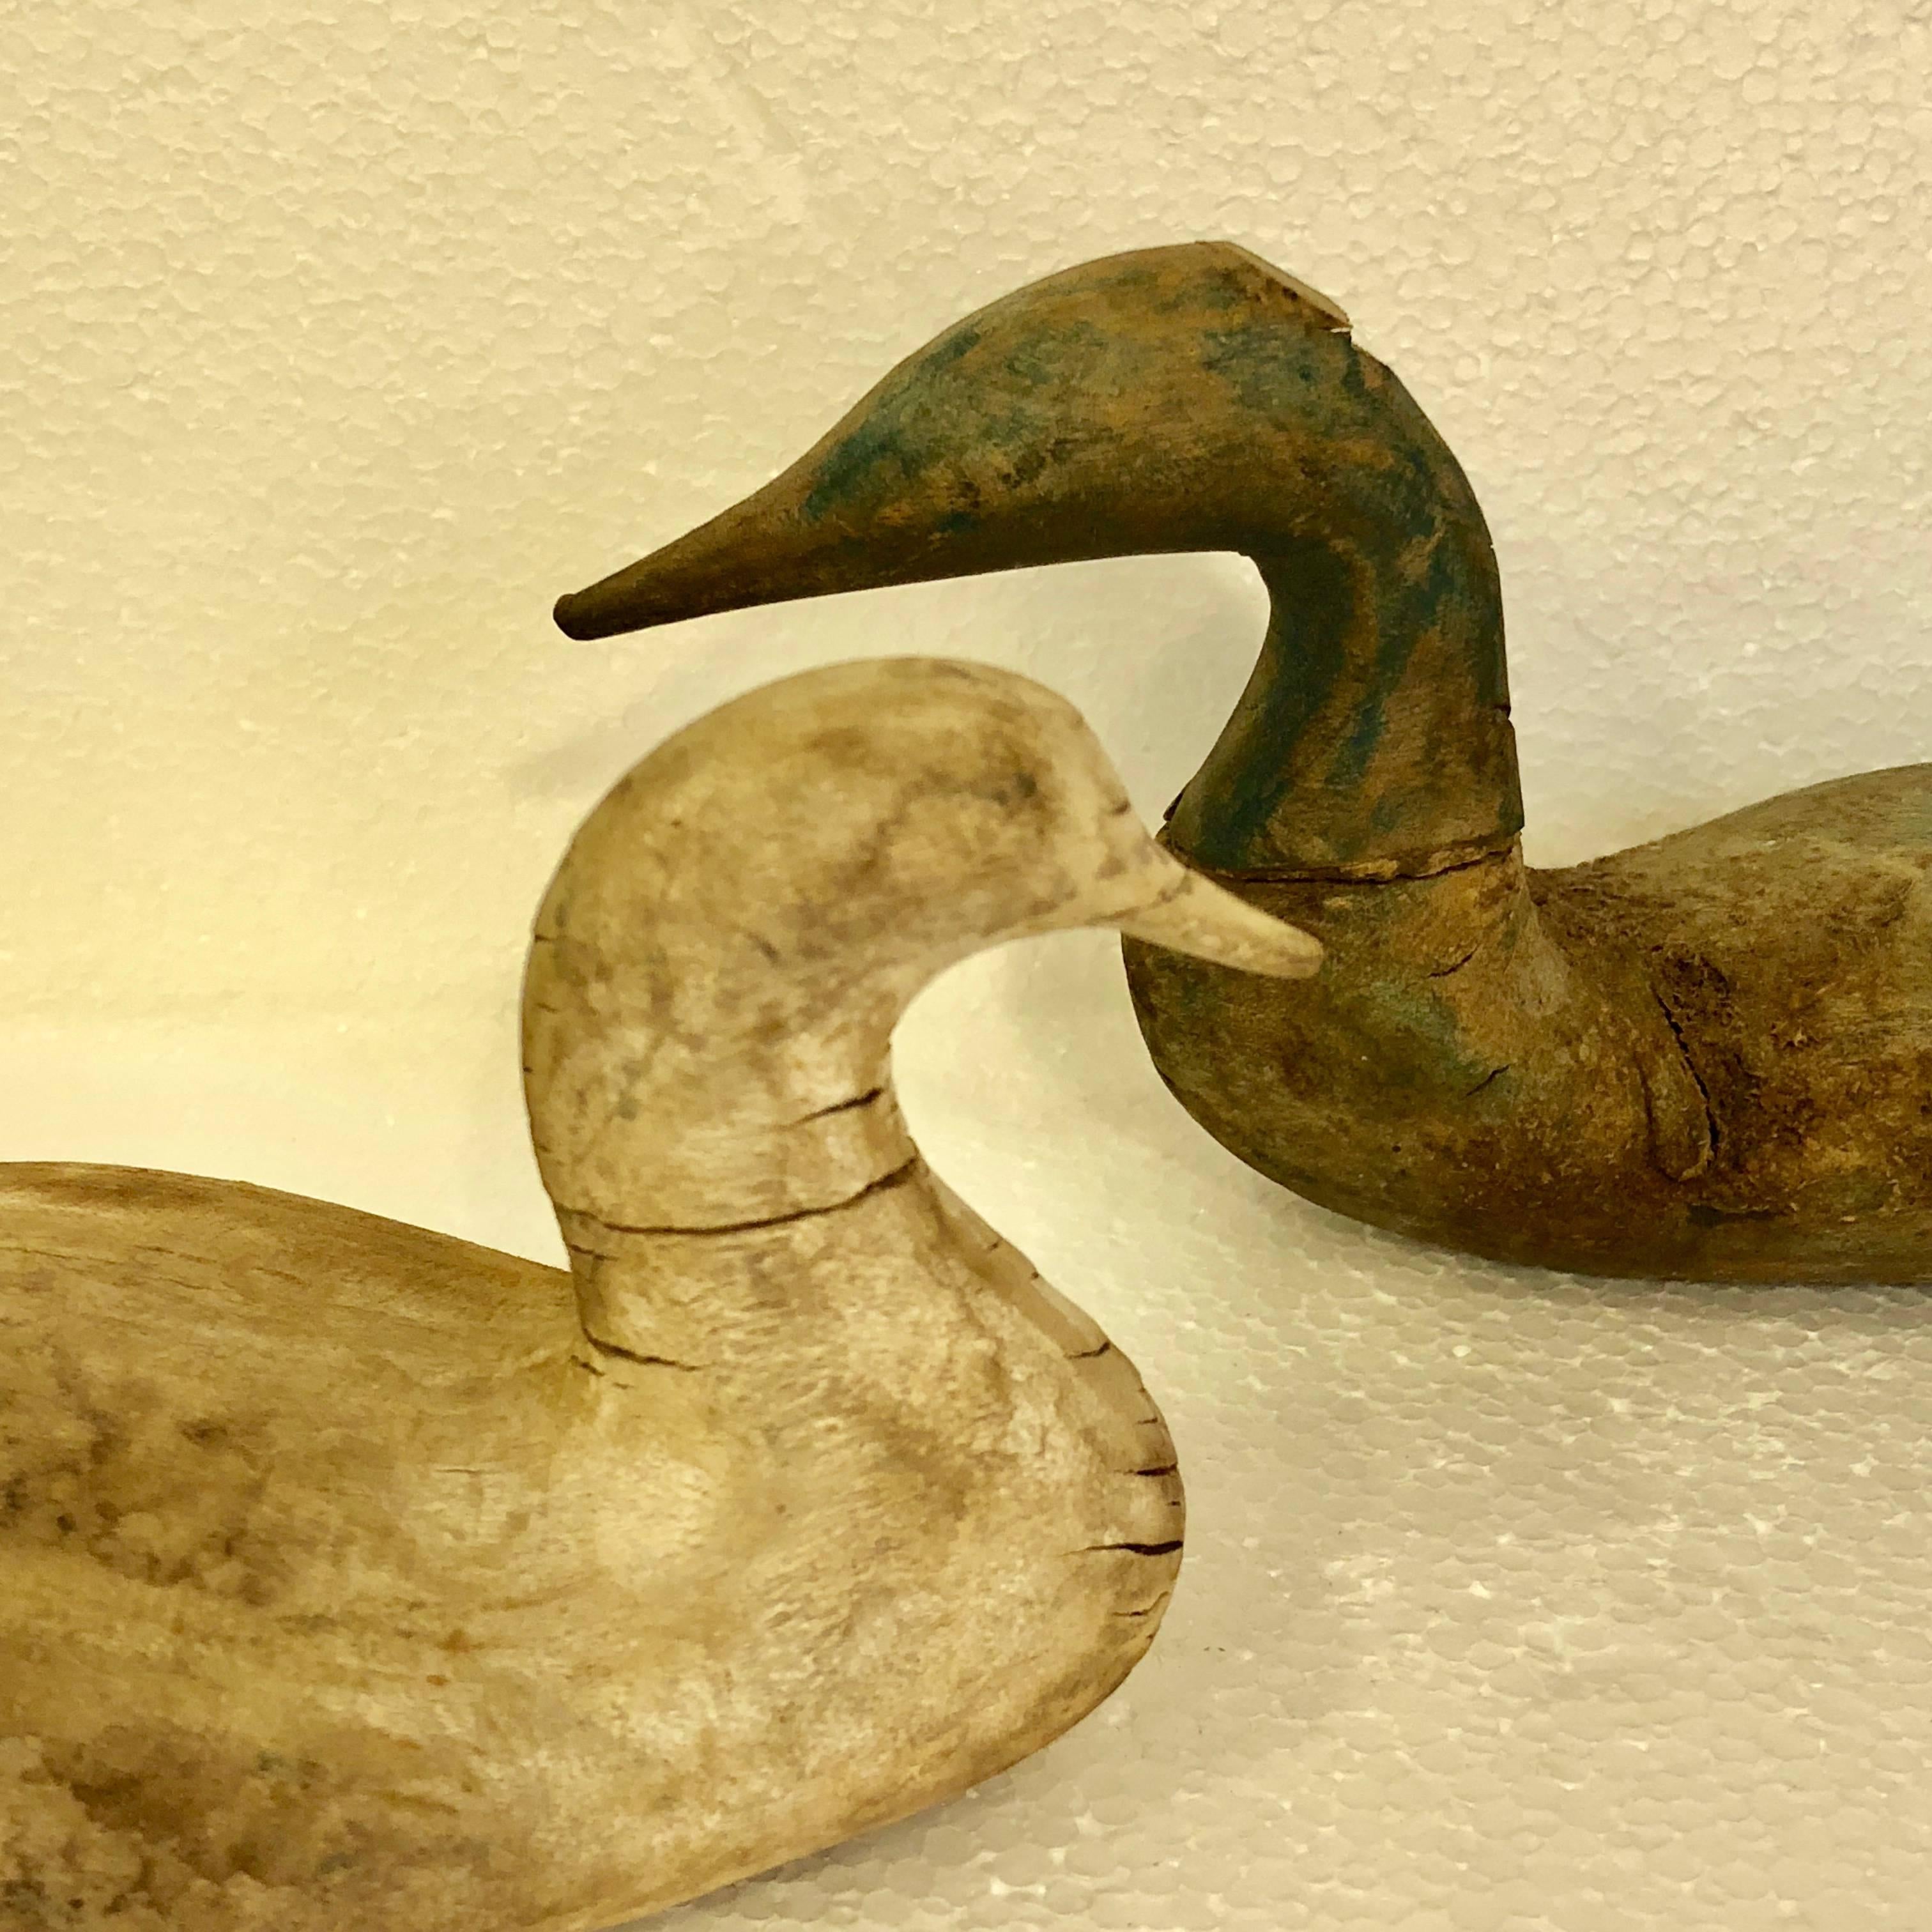 Two Scandinavian 19th Century Hand-Carved Folk Art Duck Decoys

The lighter colored duck measures: D 3.25, W 7 and H 3.25 inches
The darker one was originally mounted and has a broken off stick on the belly side, see detailed images.
This darker